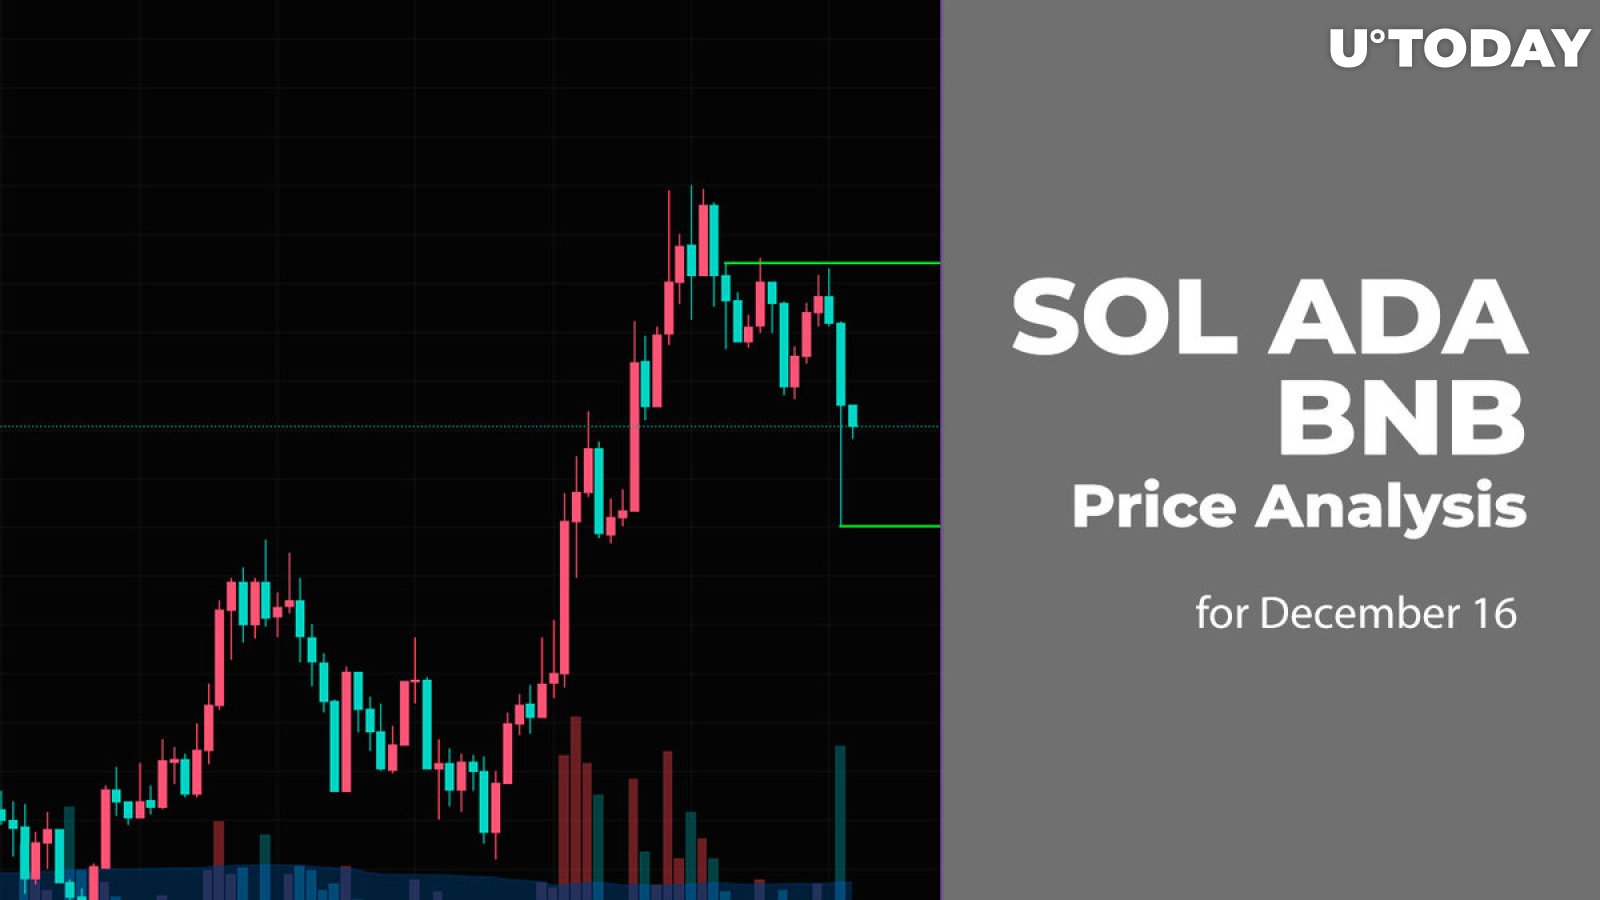 SOL, ADA and BNB Price Analysis for December 16